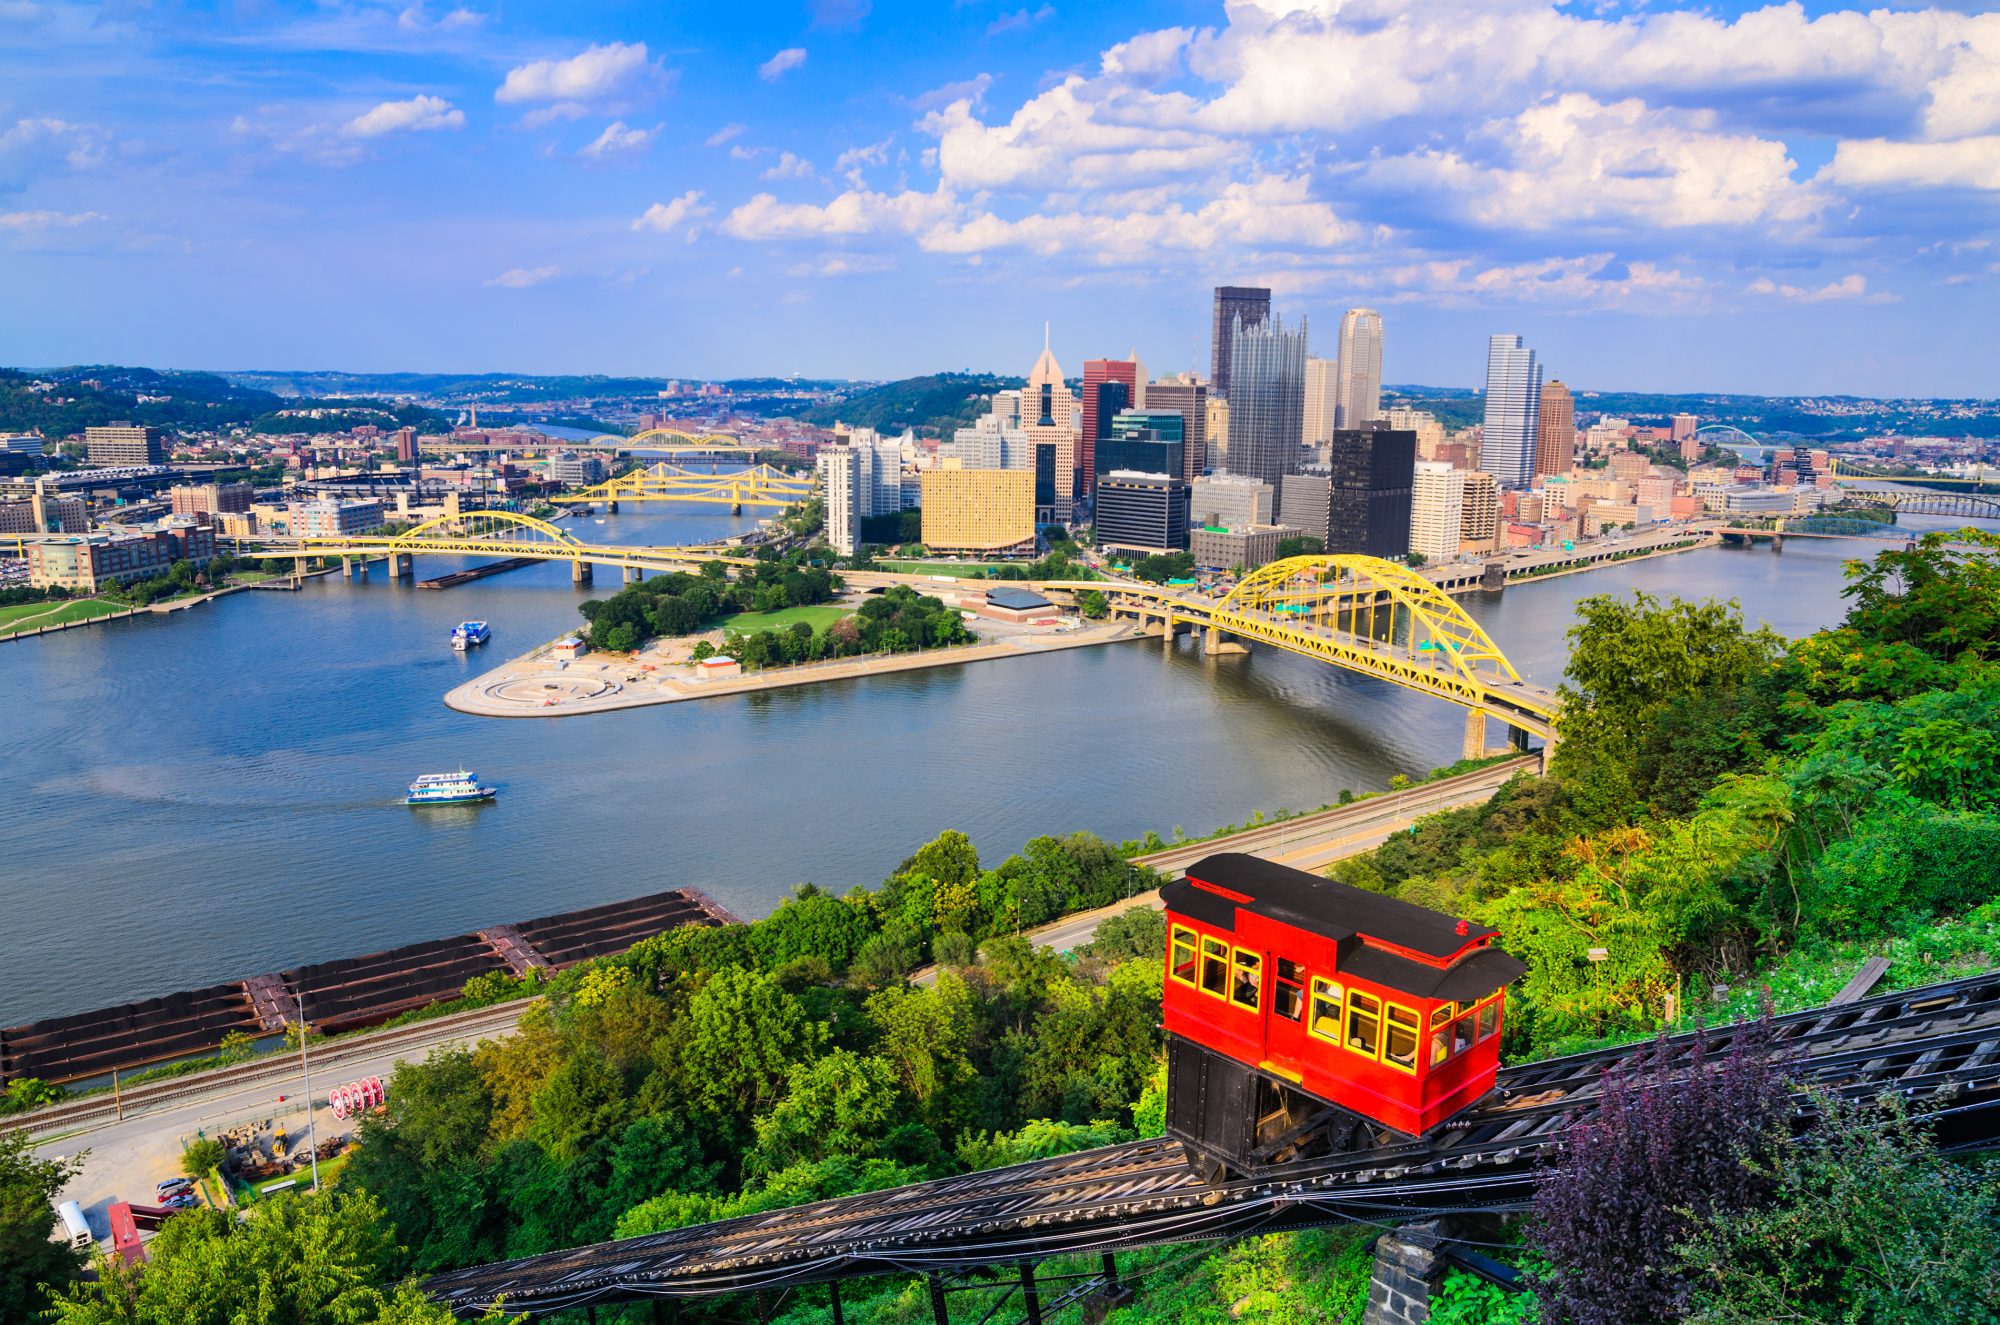 View of Duquesne Incline in Pittsburgh